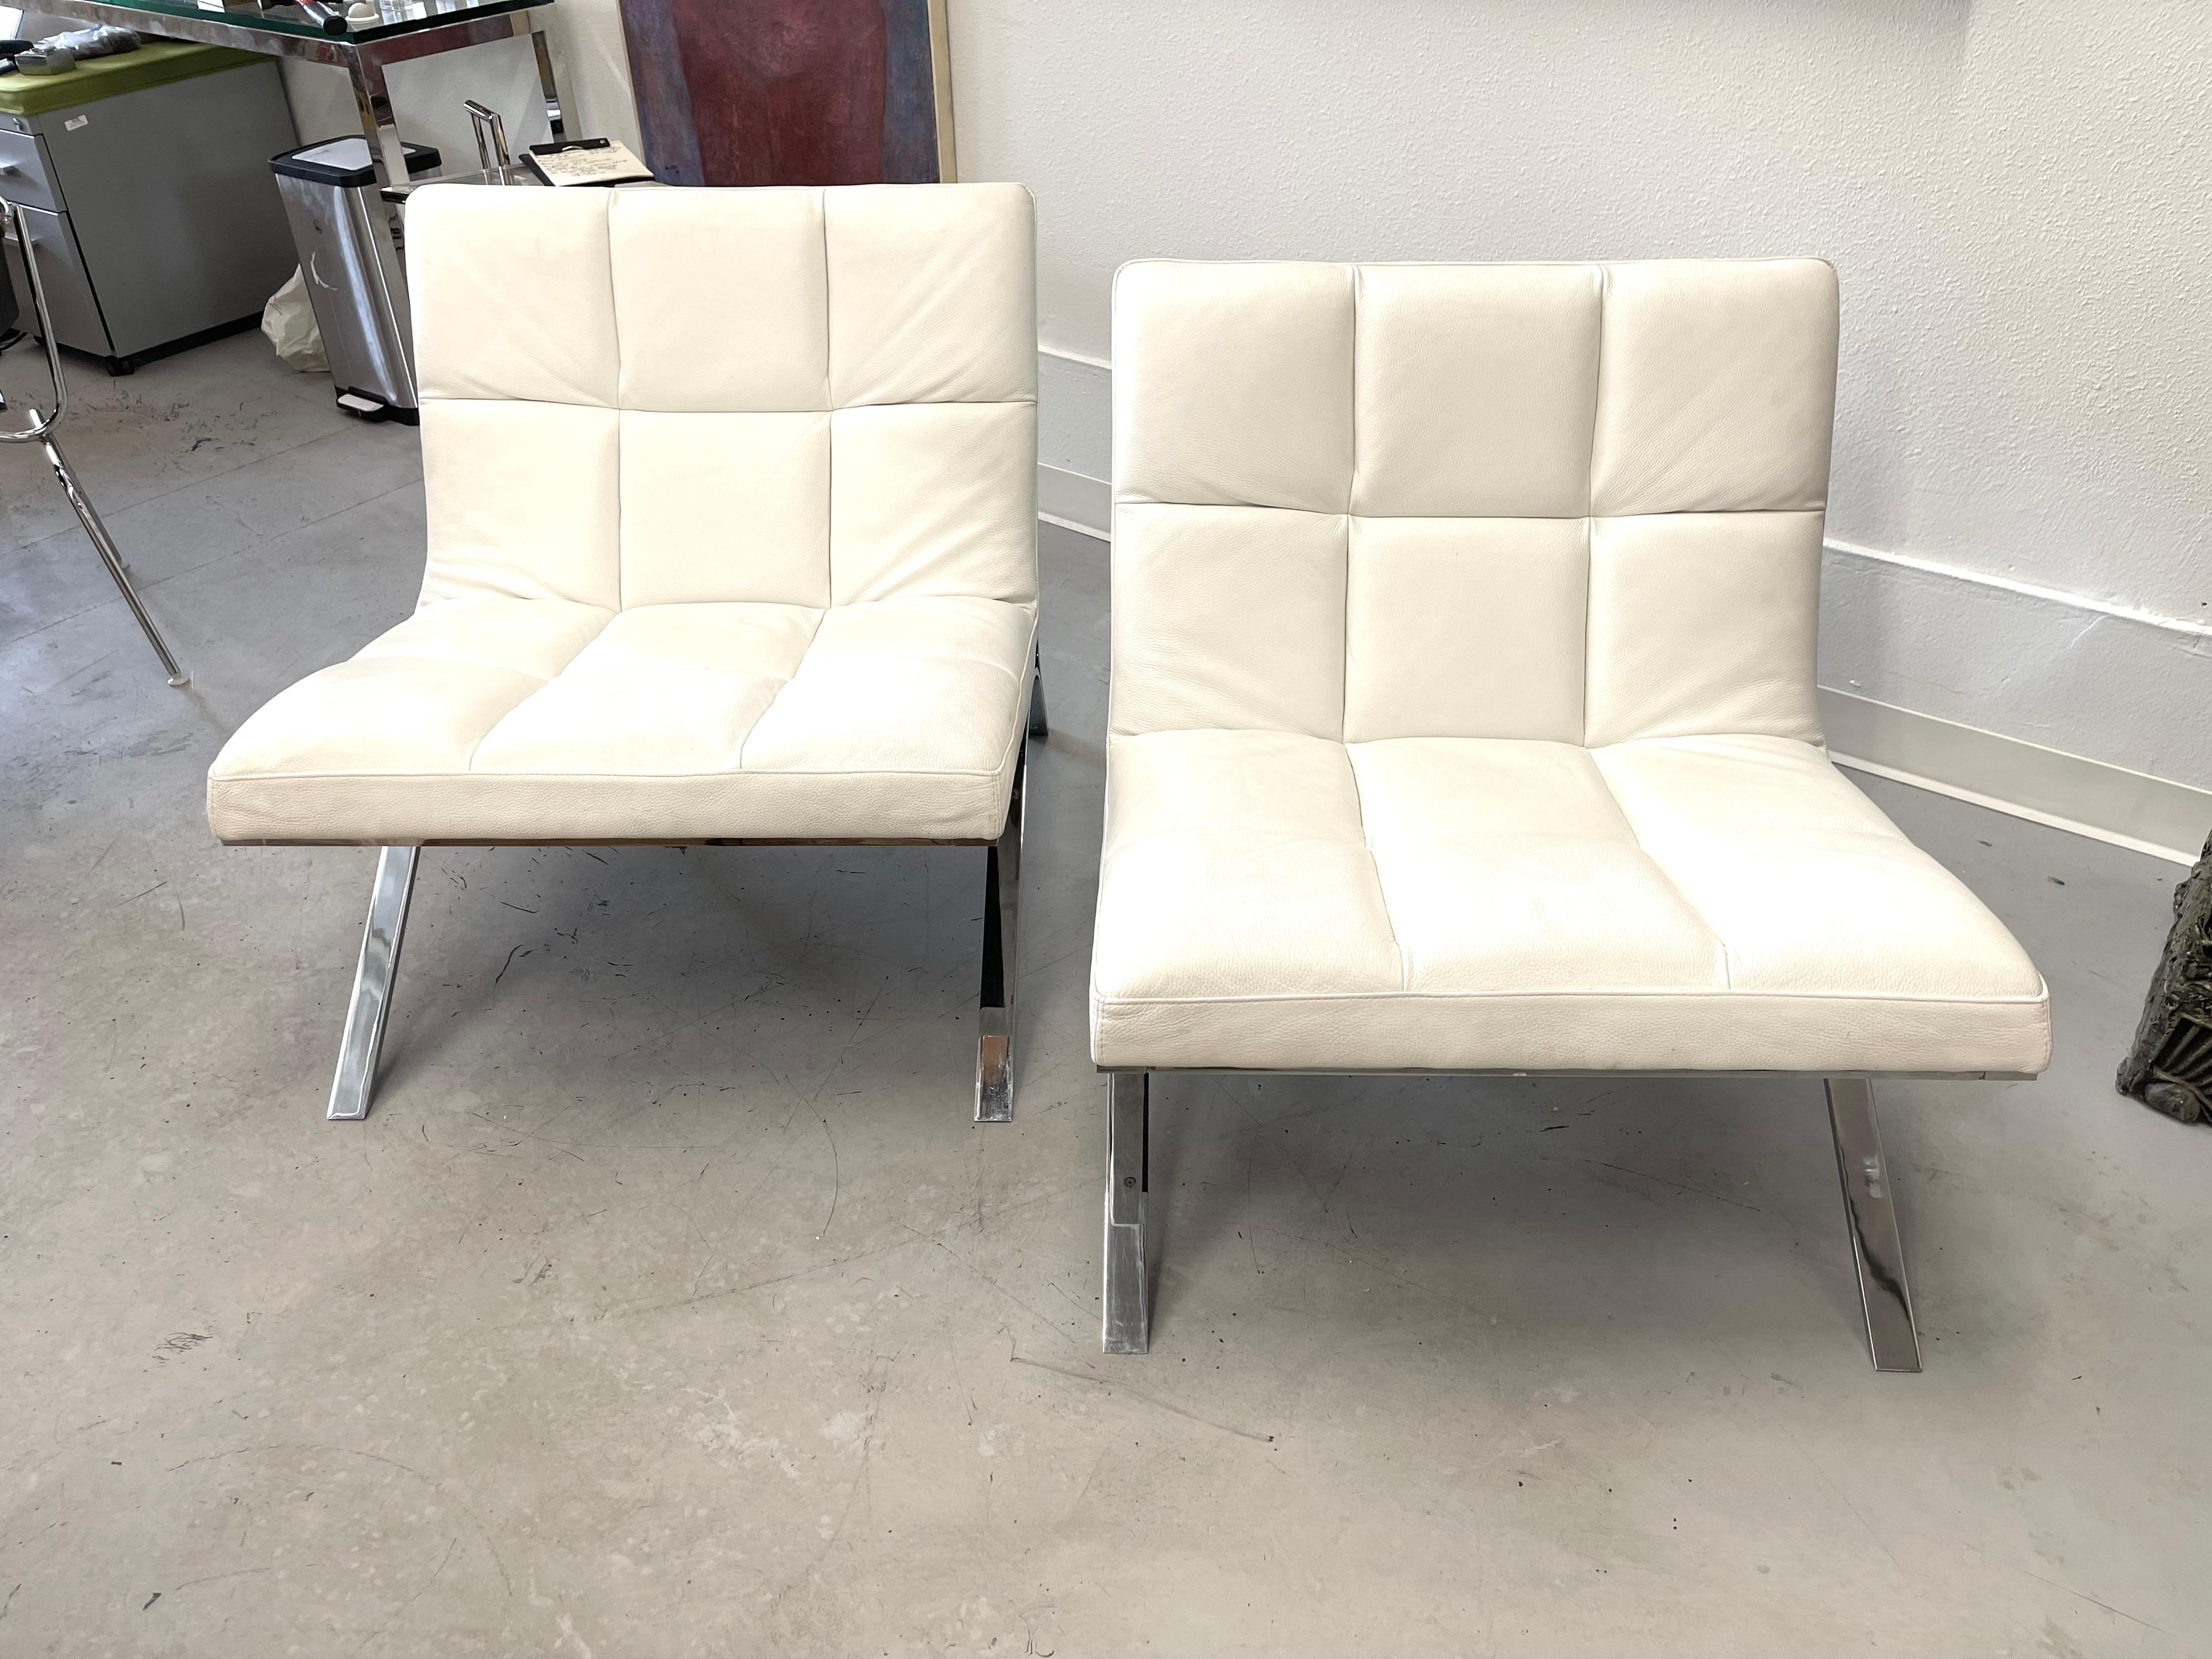 A pair of Roche Bobois Skool chairs in white leather. Nice steel frame with an elegant form. The steel is in good condition, while the leather has a bit of minor wear to the very edges. Some slight darkening of the white leather. Pictured next to an